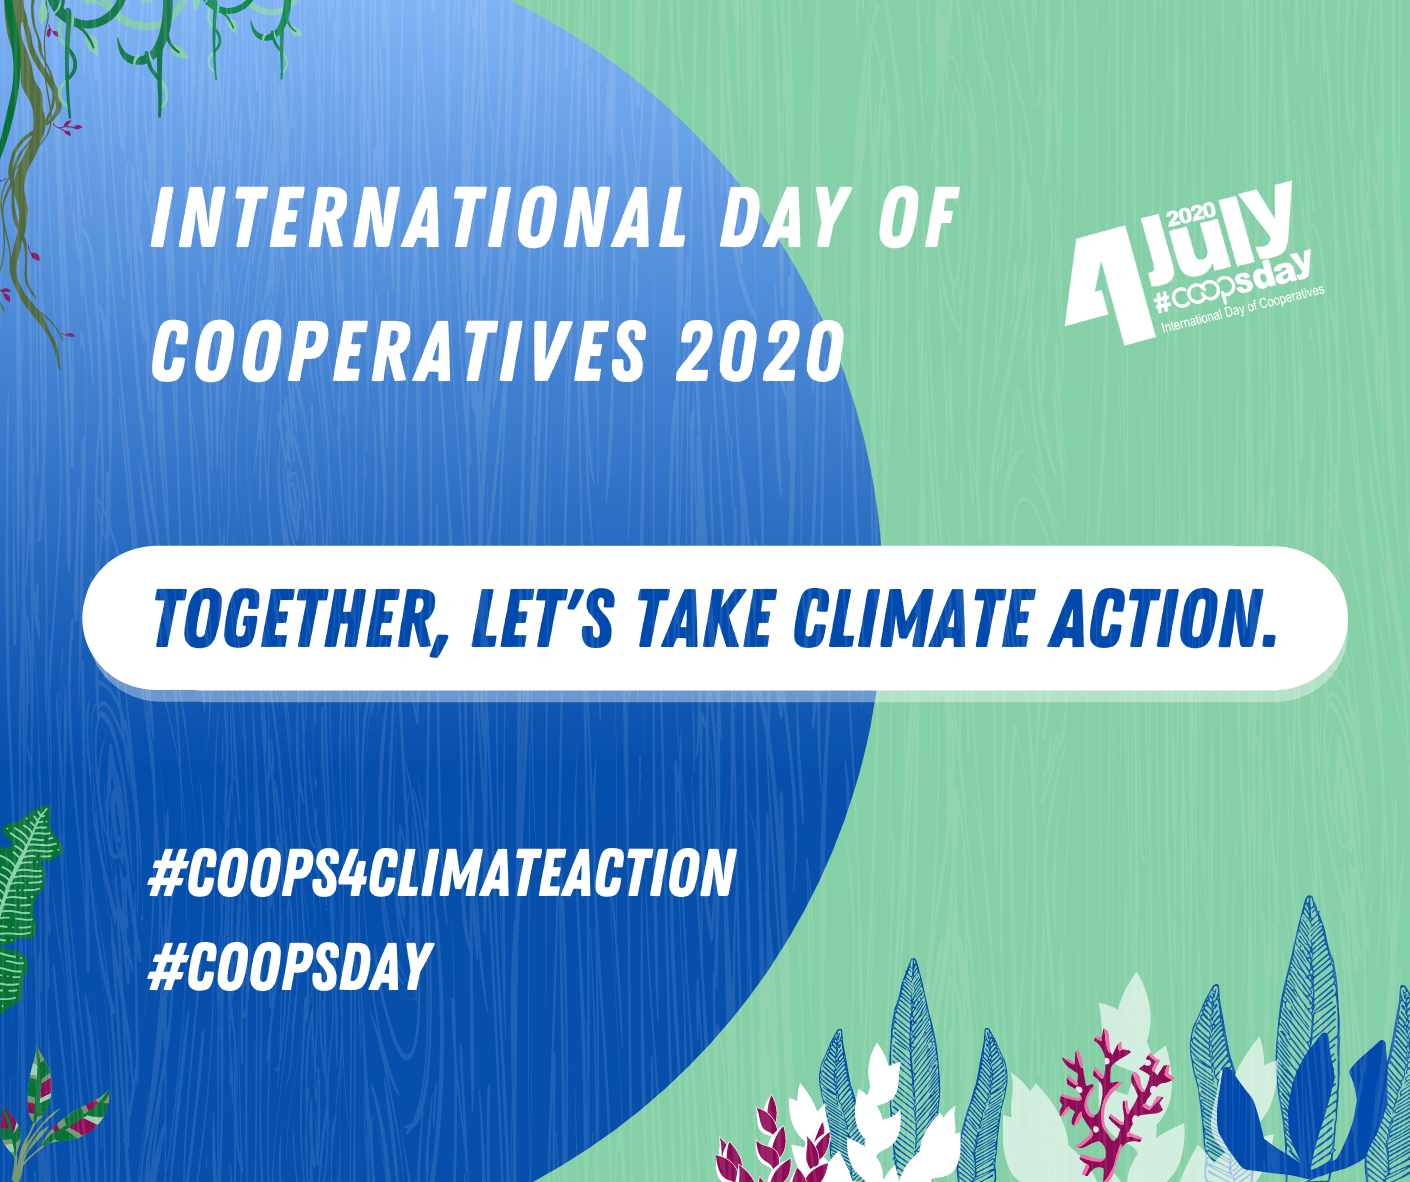 CoopsDayClimateAction